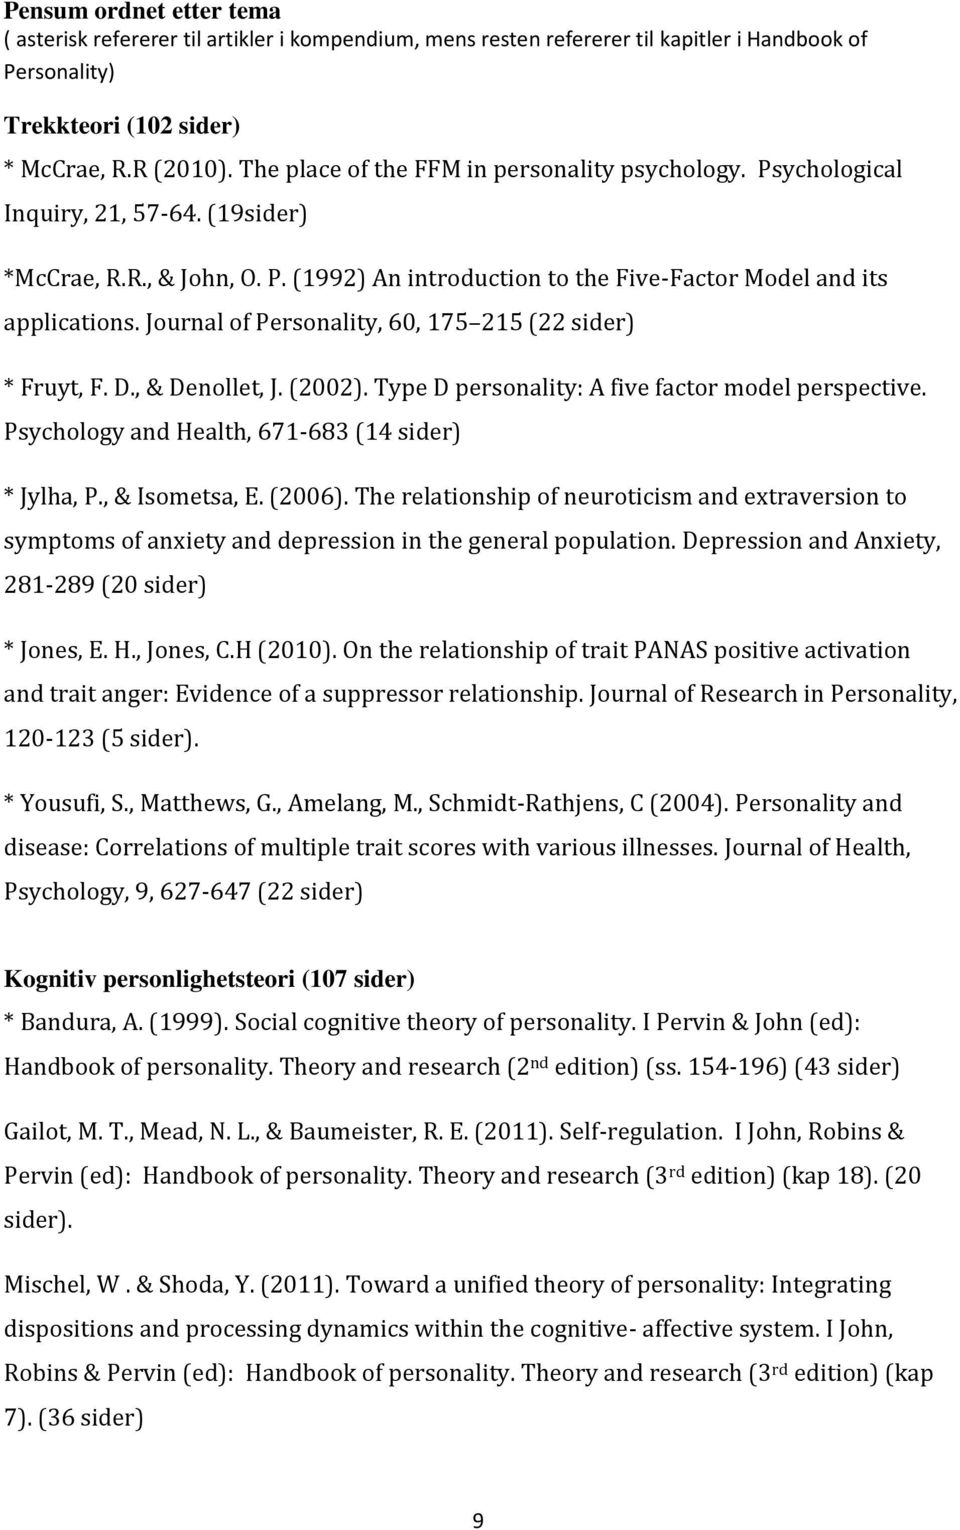 Journal of Personality, 60, 175 215 (22 sider) * Fruyt, F. D., & Denollet, J. (2002). Type D personality: A five factor model perspective. Psychology and Health, 671-683 (14 sider) * Jylha, P.